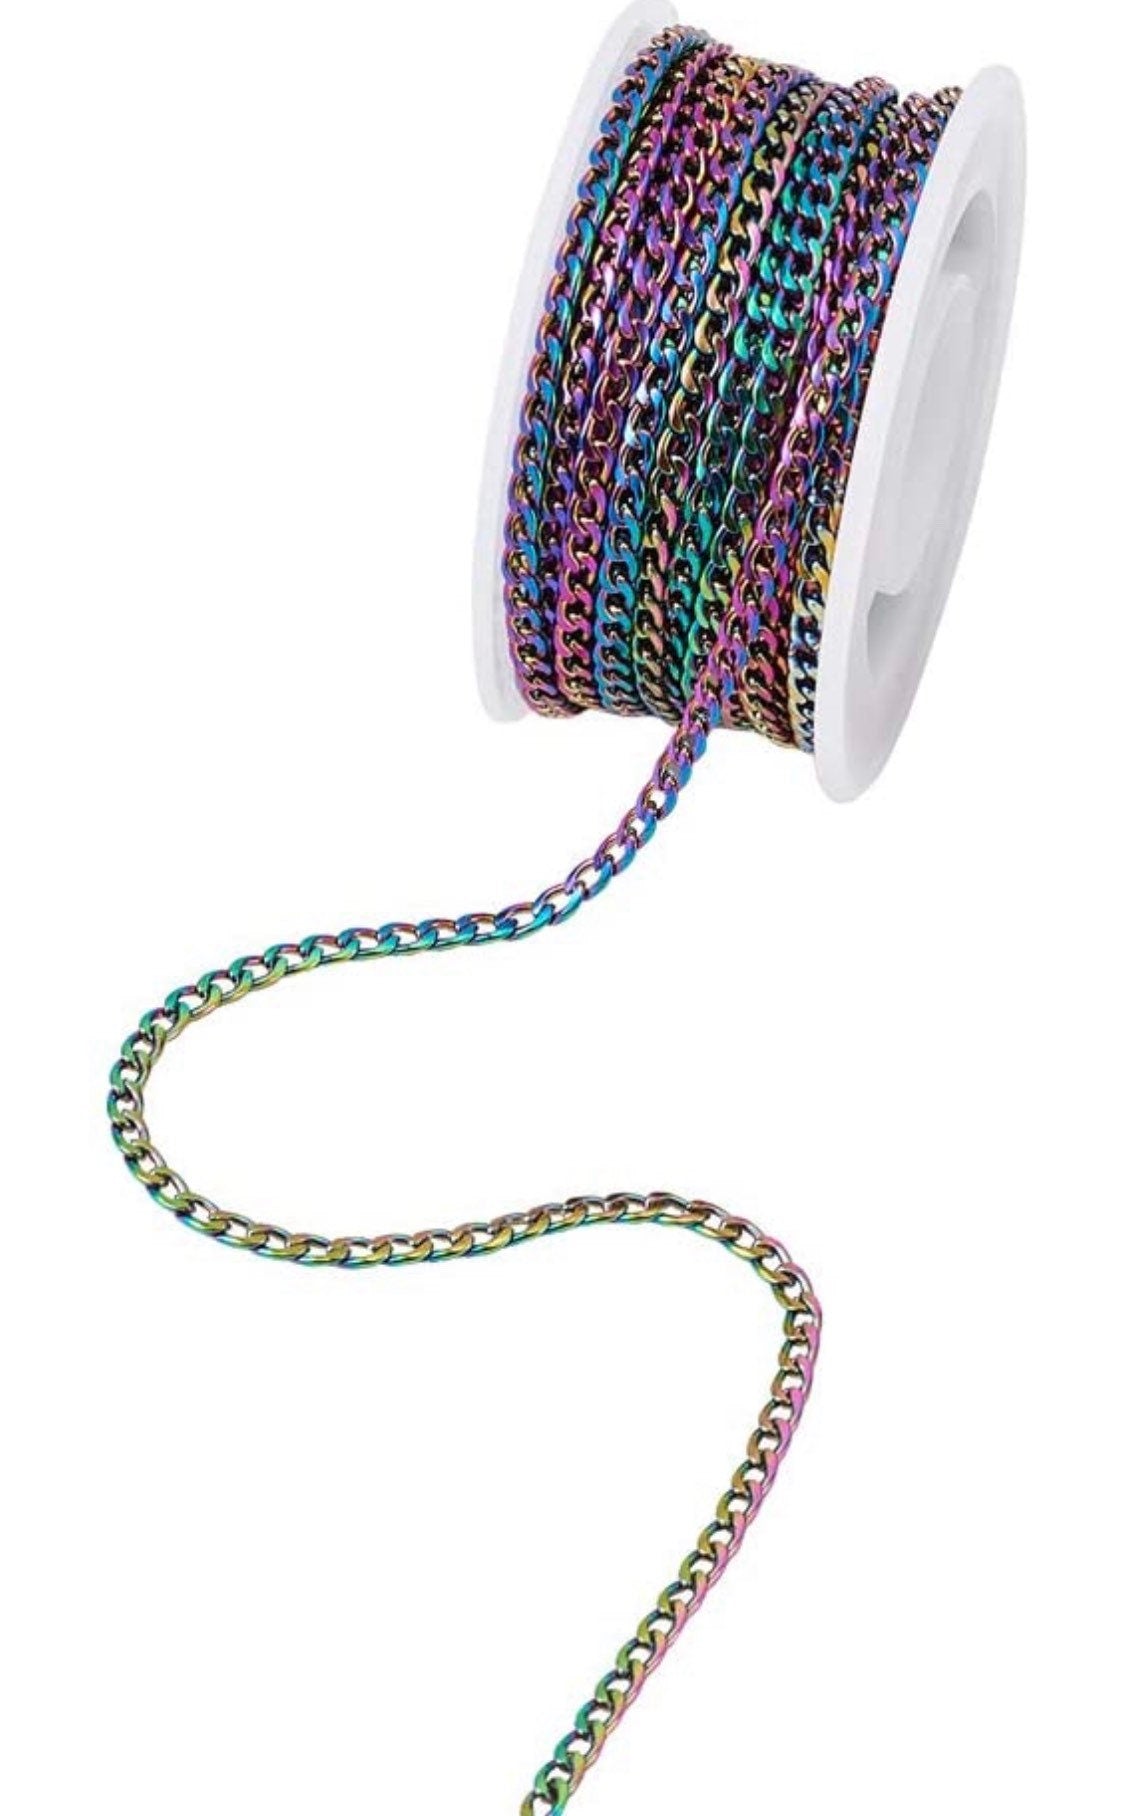 Rainbow chain for jewelry are crafts - 5 yards